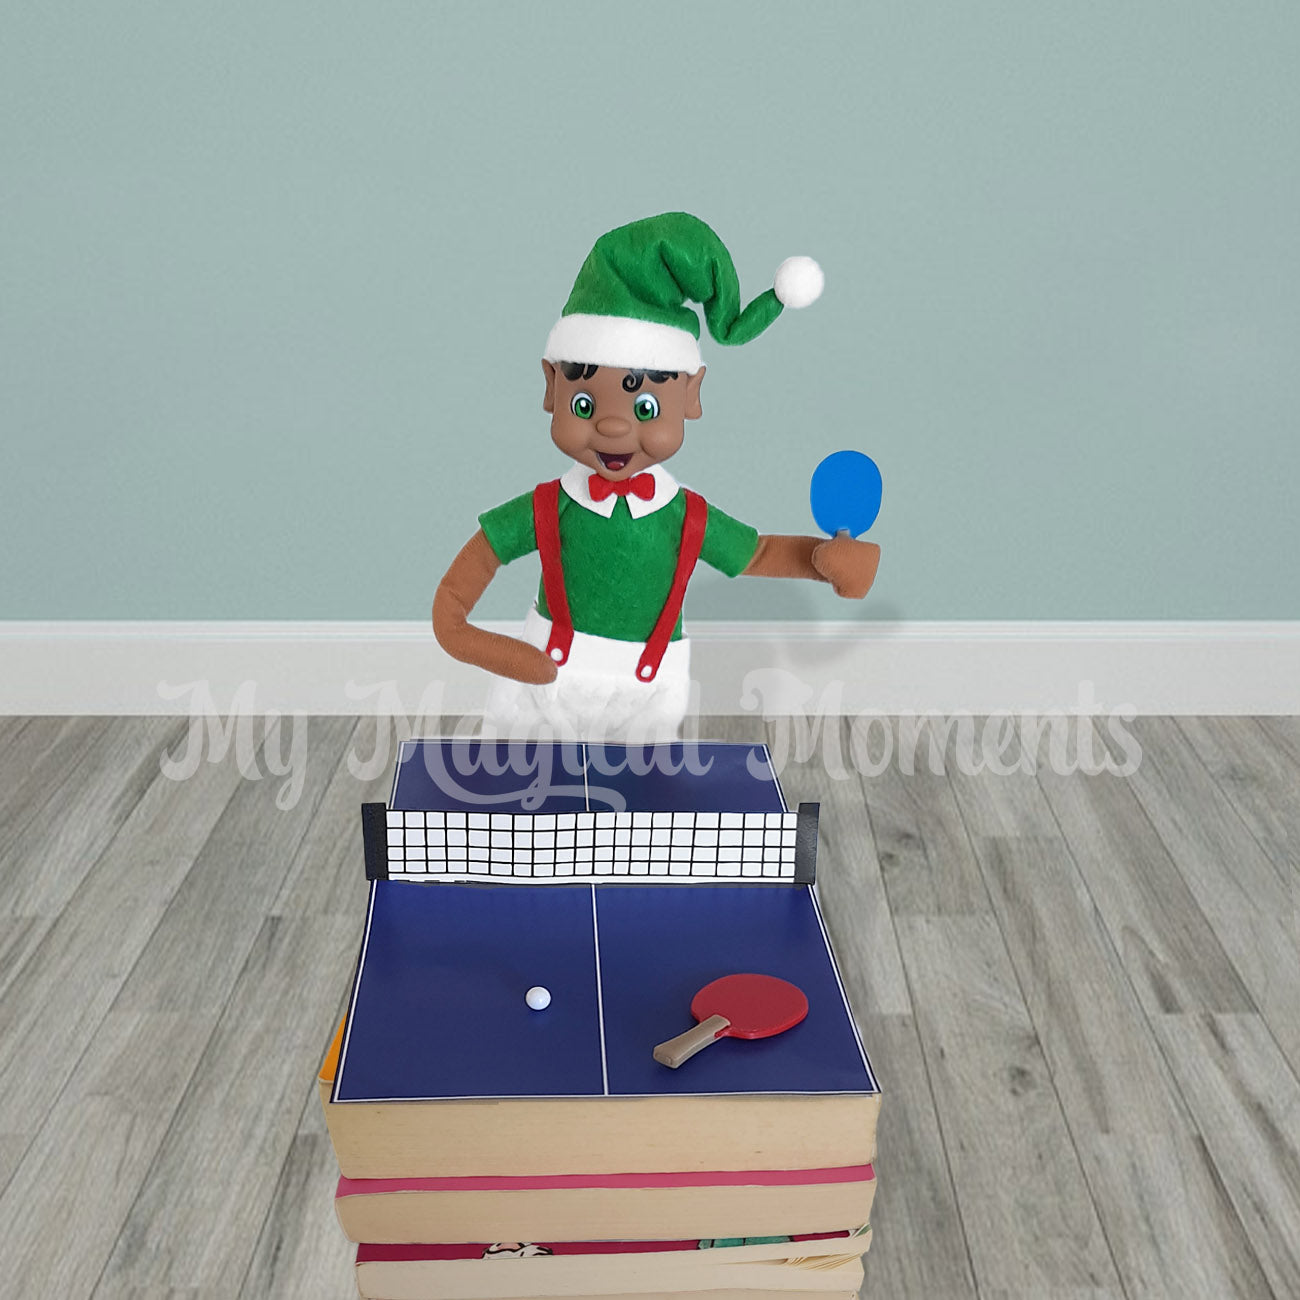 Elf playing Ping pong with miniature paddles and a ping pong ball on books